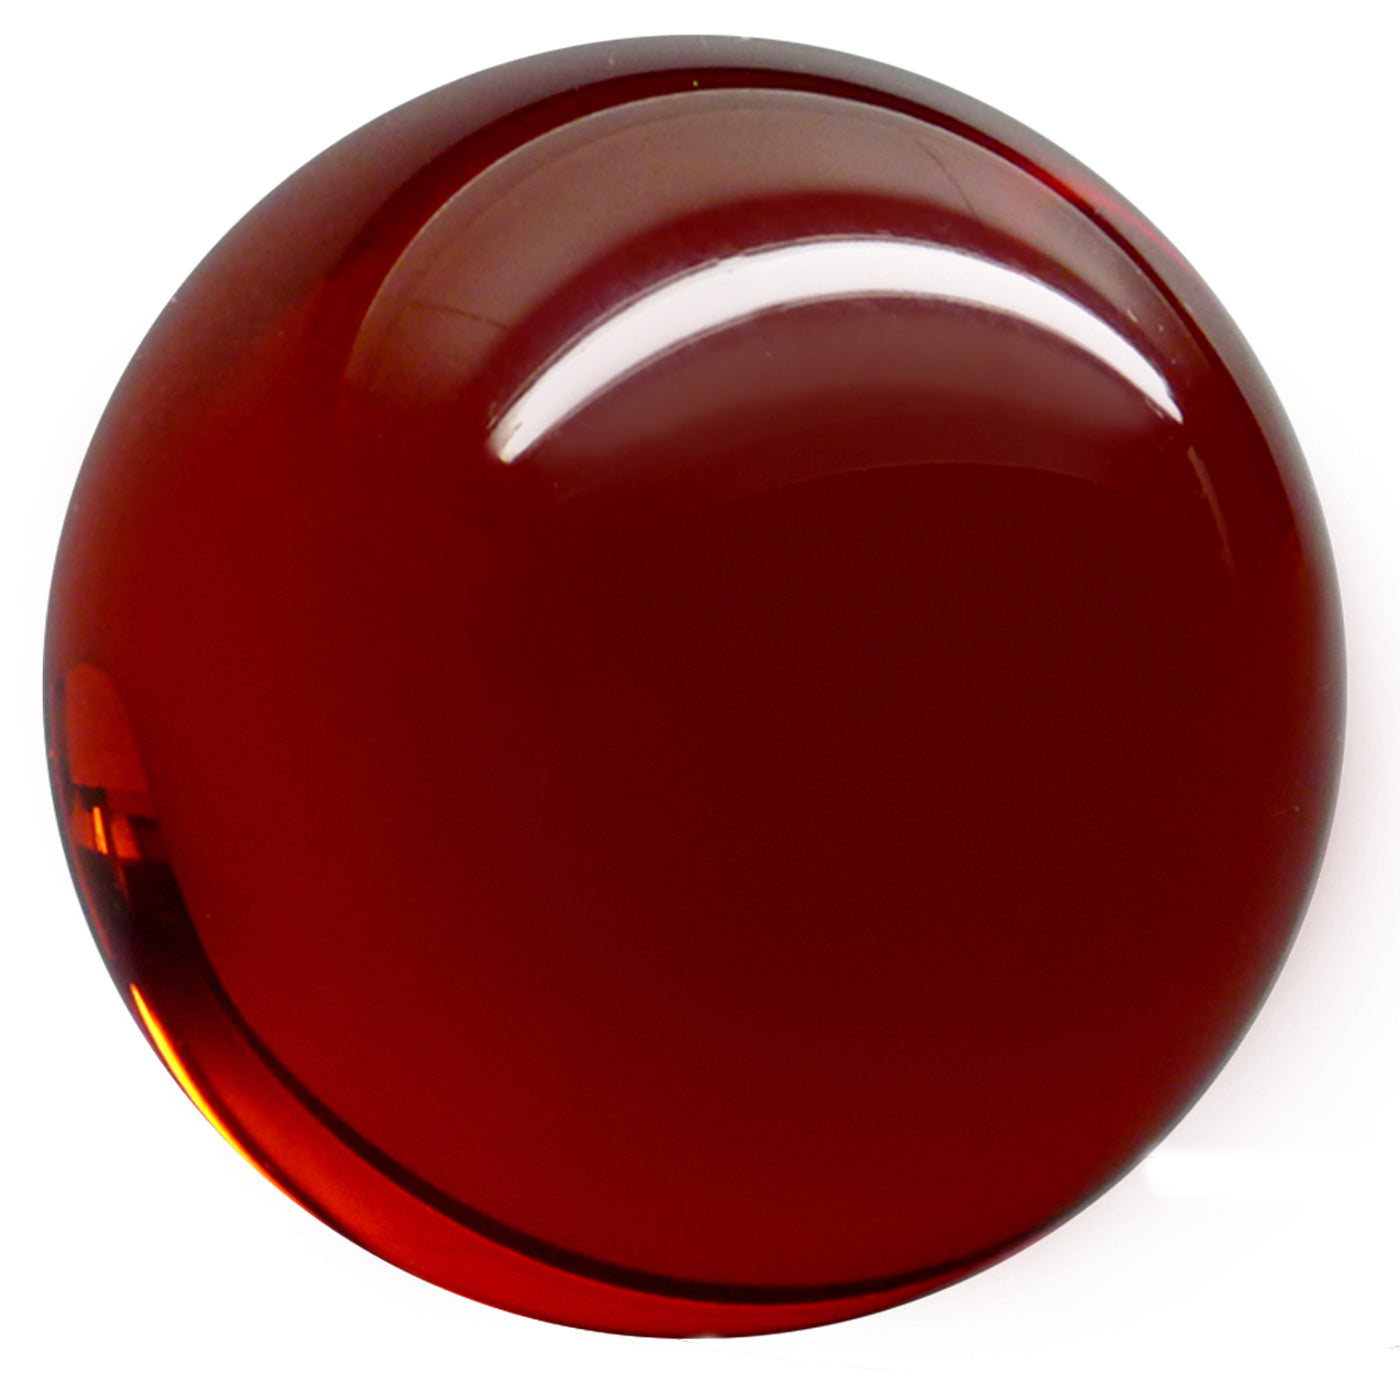 Transparent Red Acrylic contact ball 90mm 520g and protective case